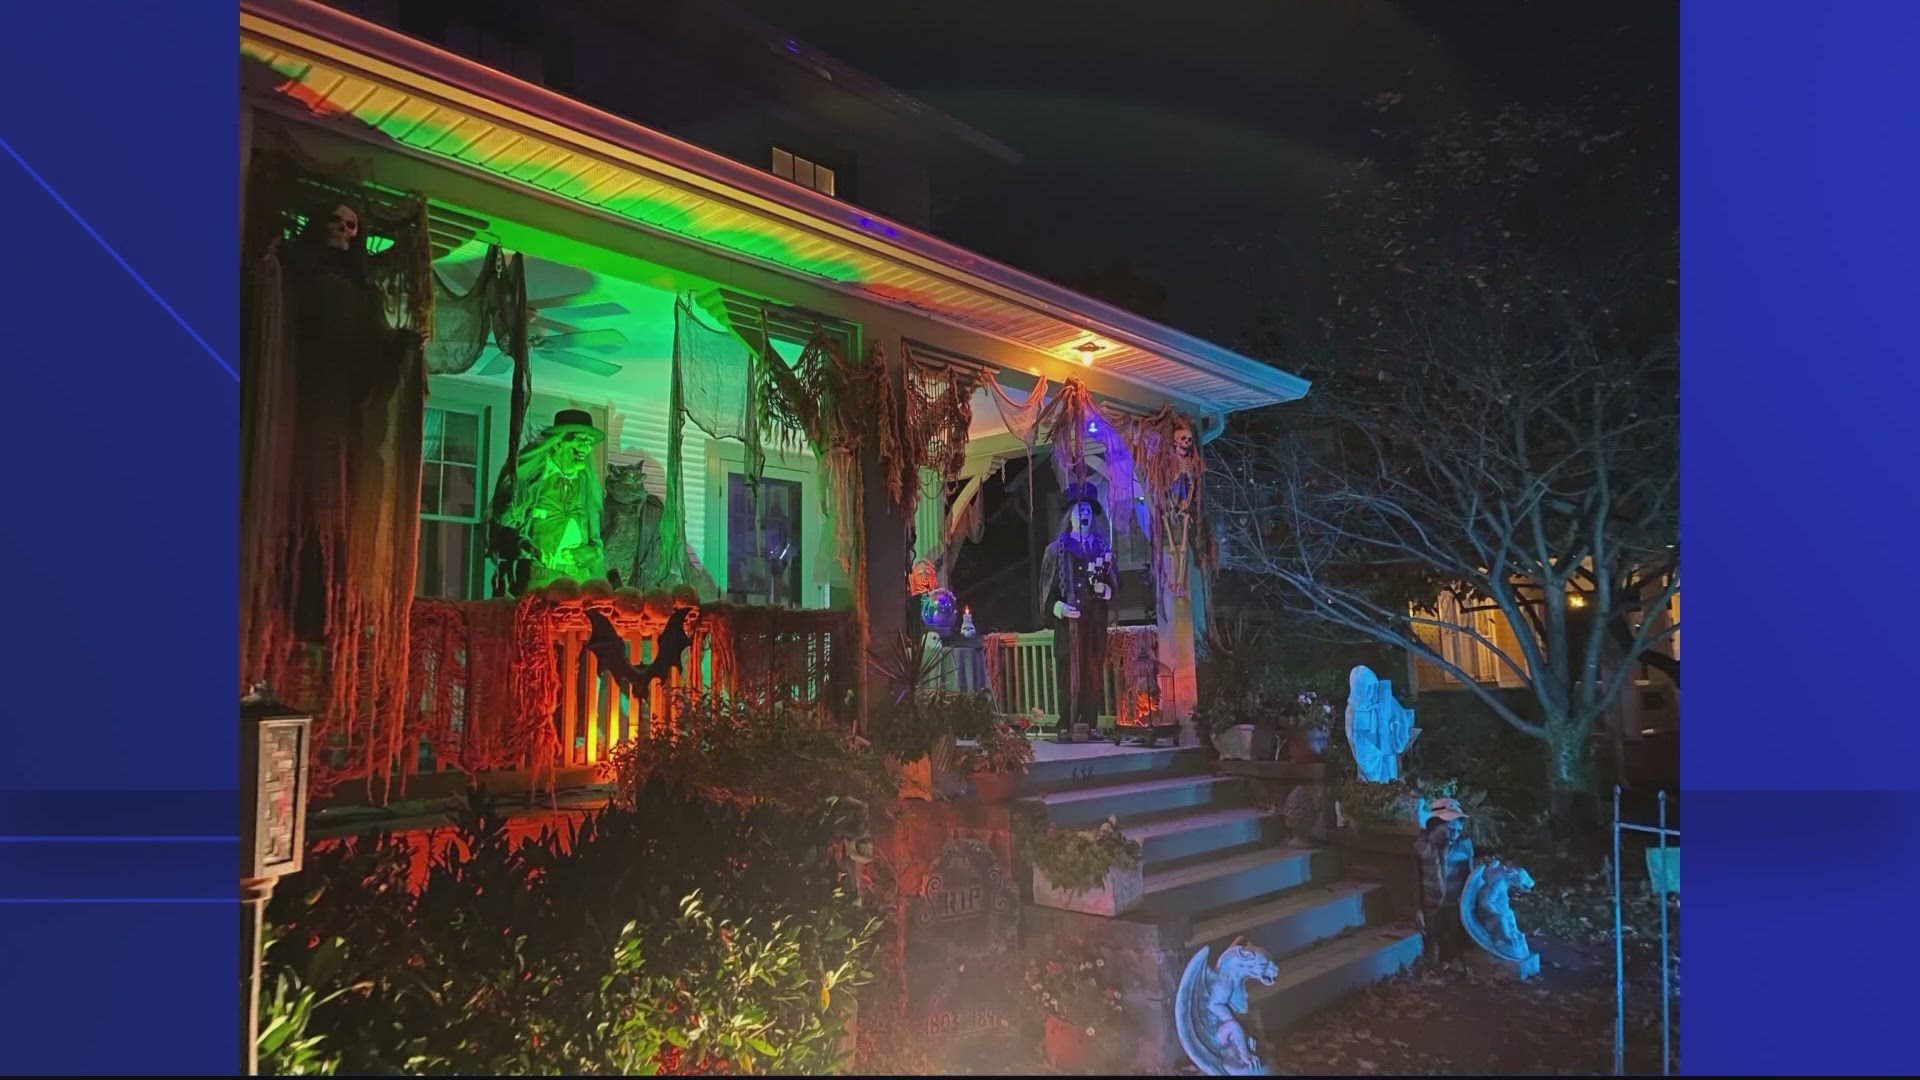 There's a neighborhood in Arlington that goes 'all in.'
Take a look at these front-yard and front-porch decorations.